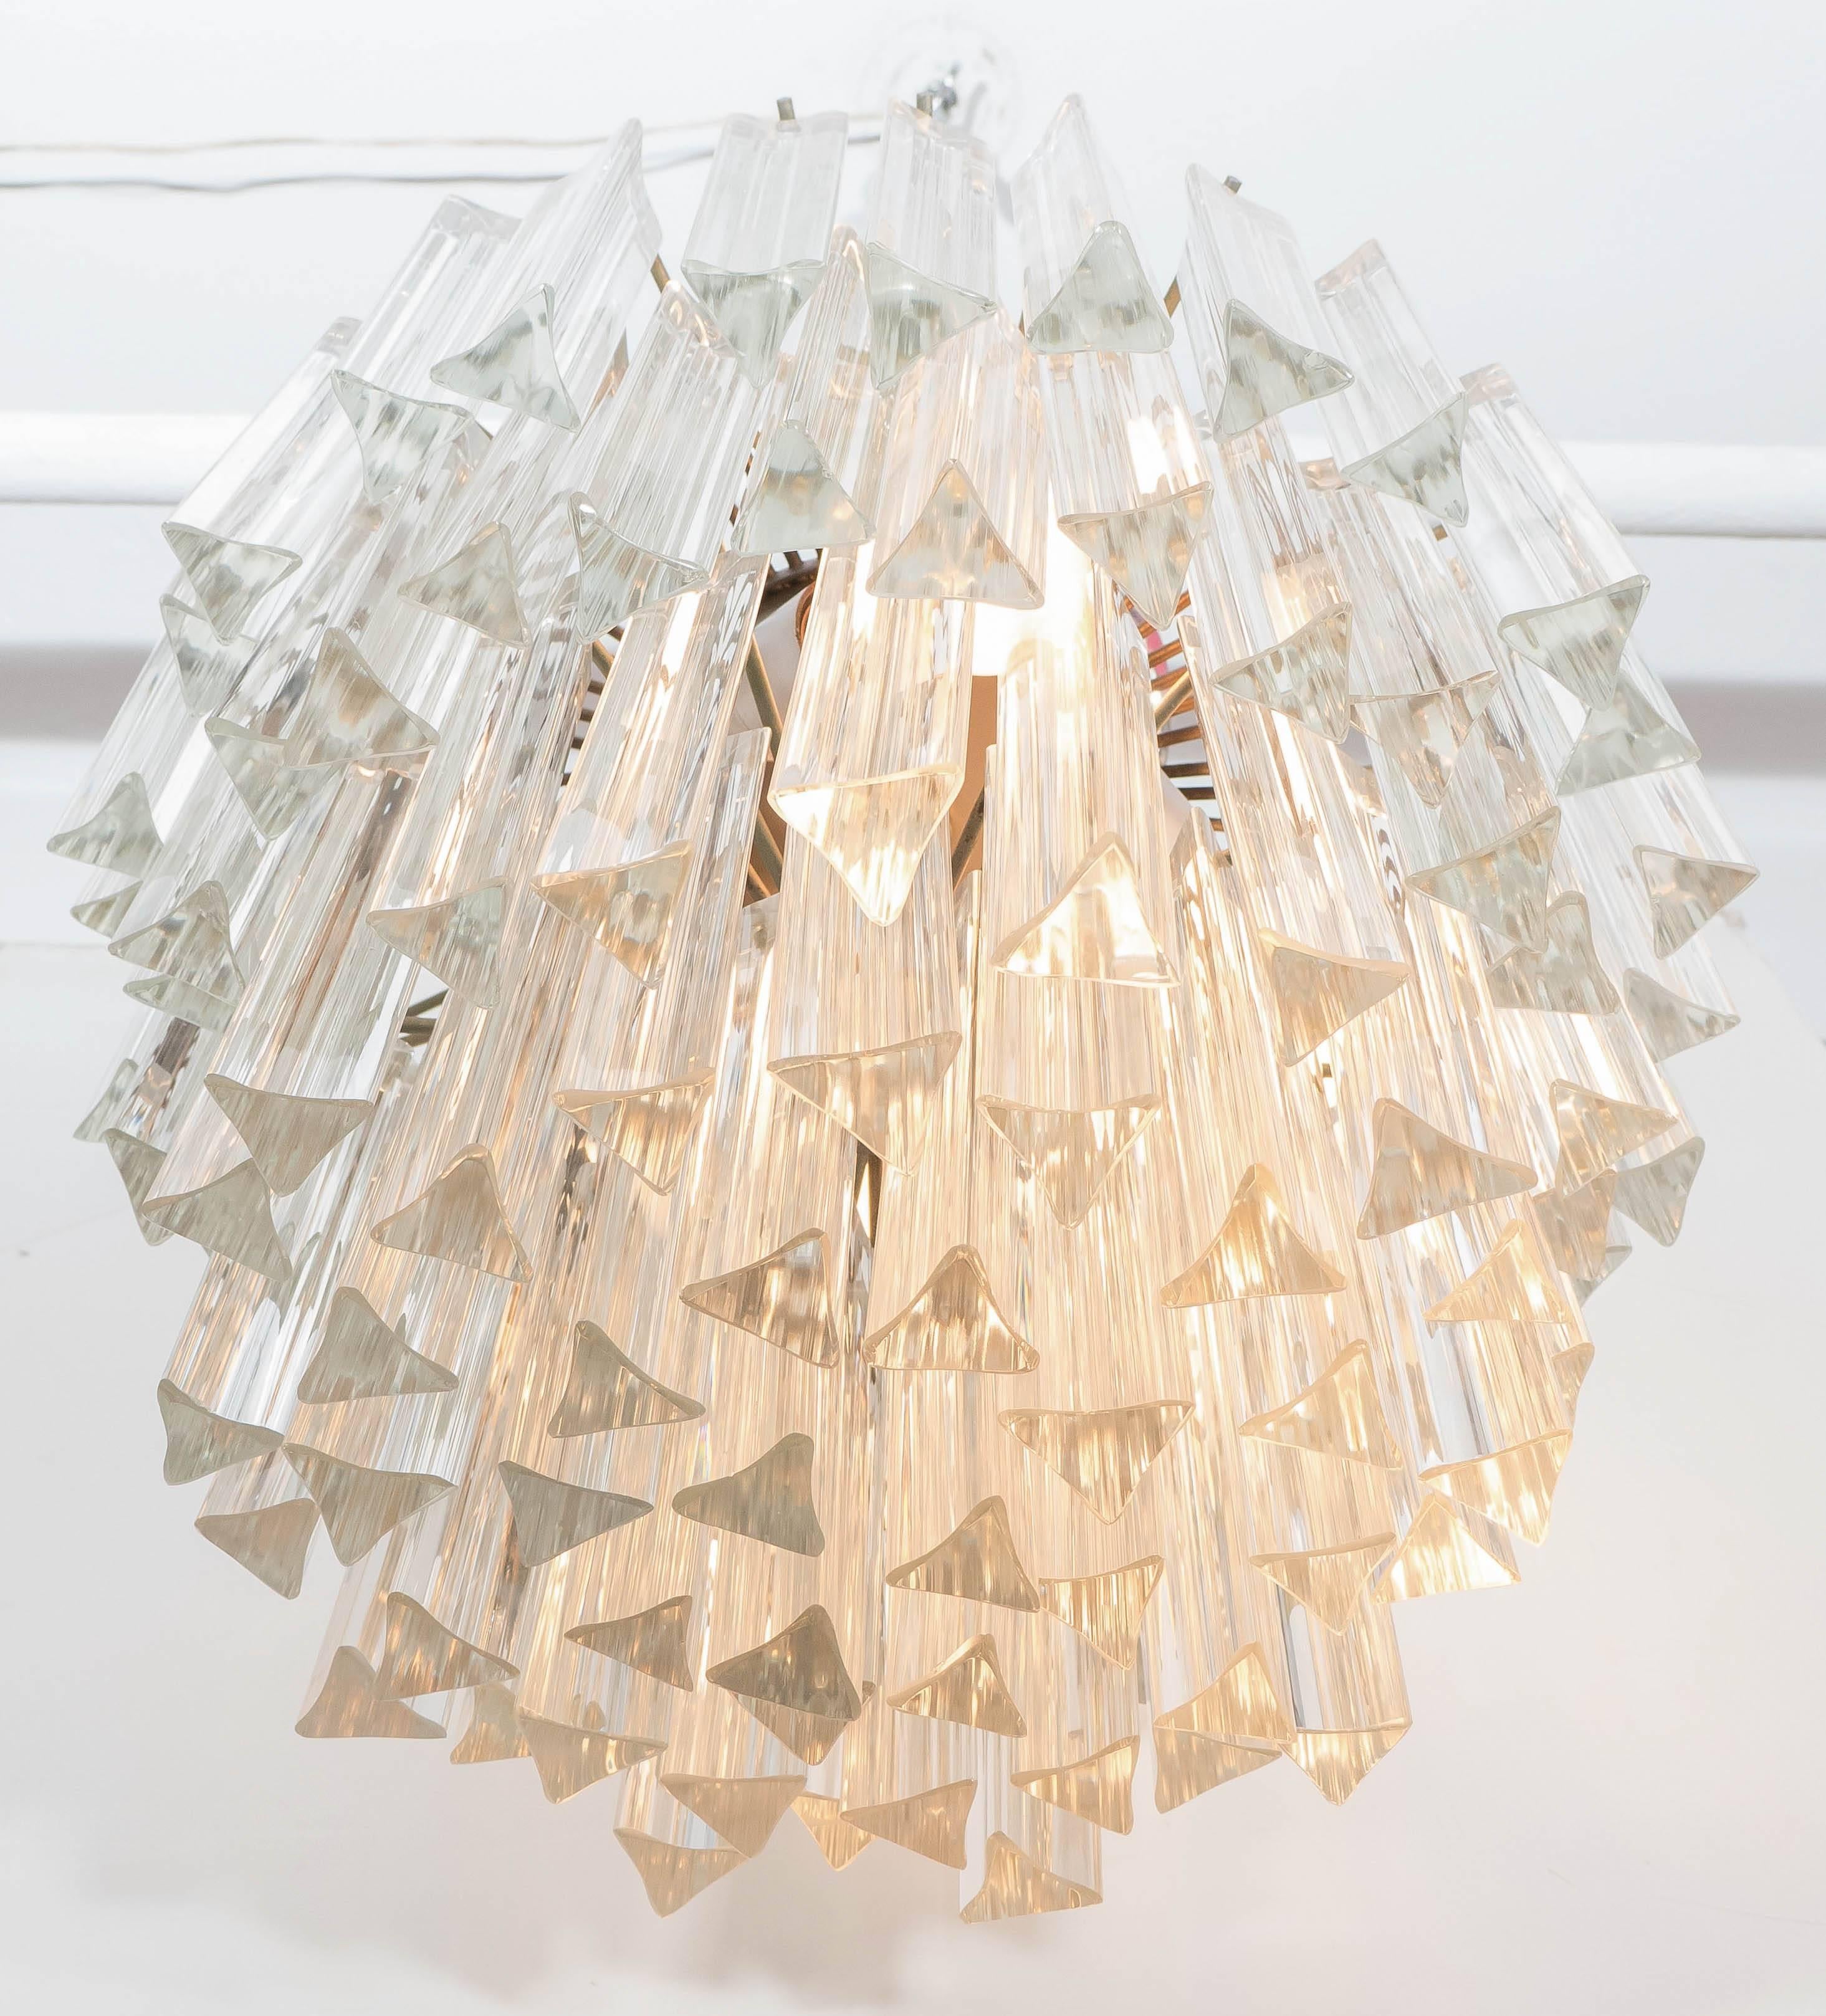 20th Century Venini Chandelier with Staggered Glass Prisms